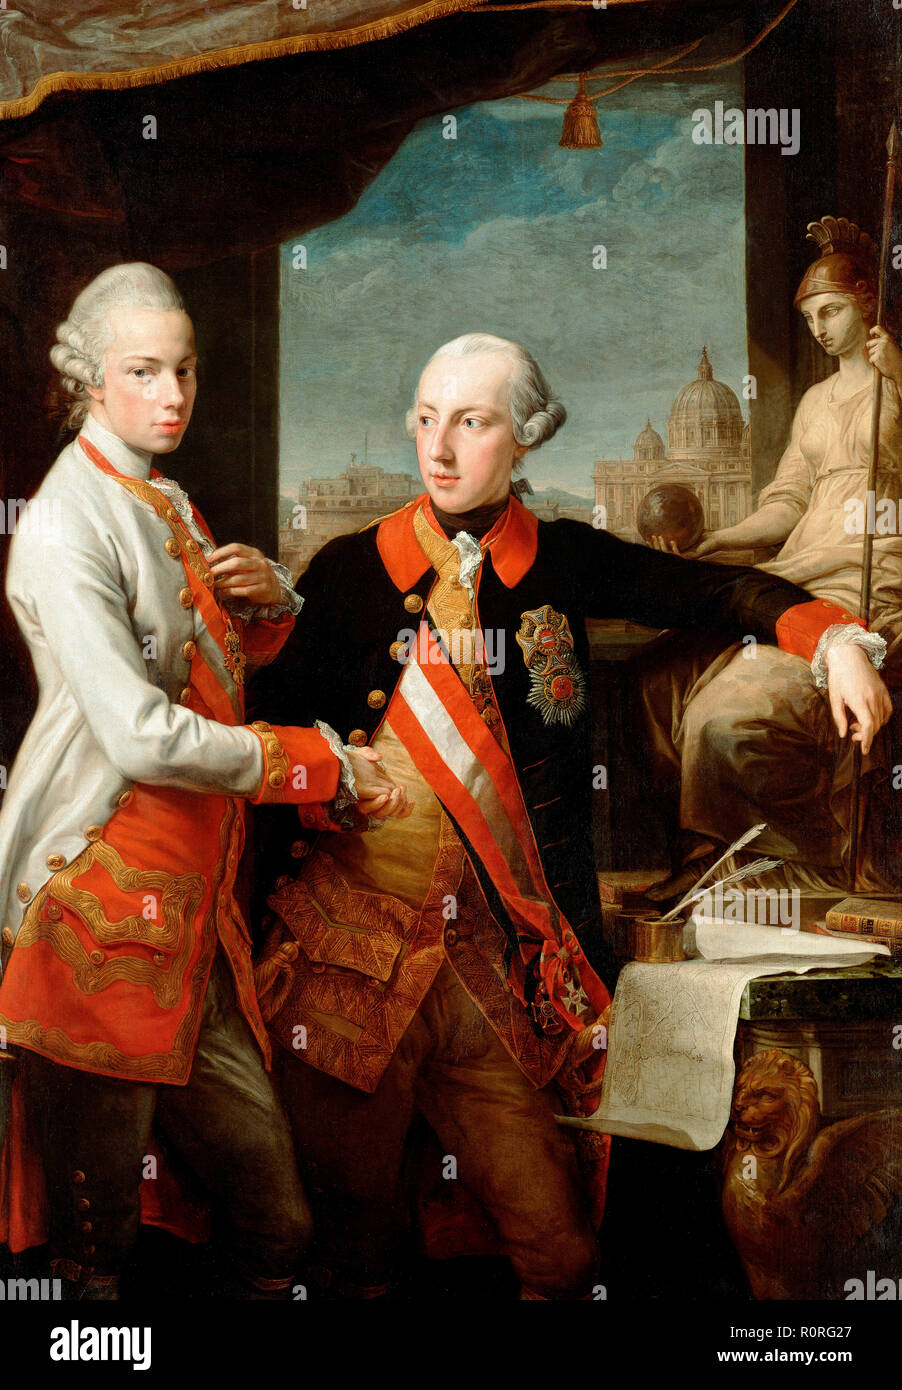 Portrait of Emperor Joseph II (right) and his younger brother Grand Duke Leopold of Tuscany (left), who would later become Holy Roman Emperor as Leopold II. Pompeo Batoni, 1769 Stock Photo